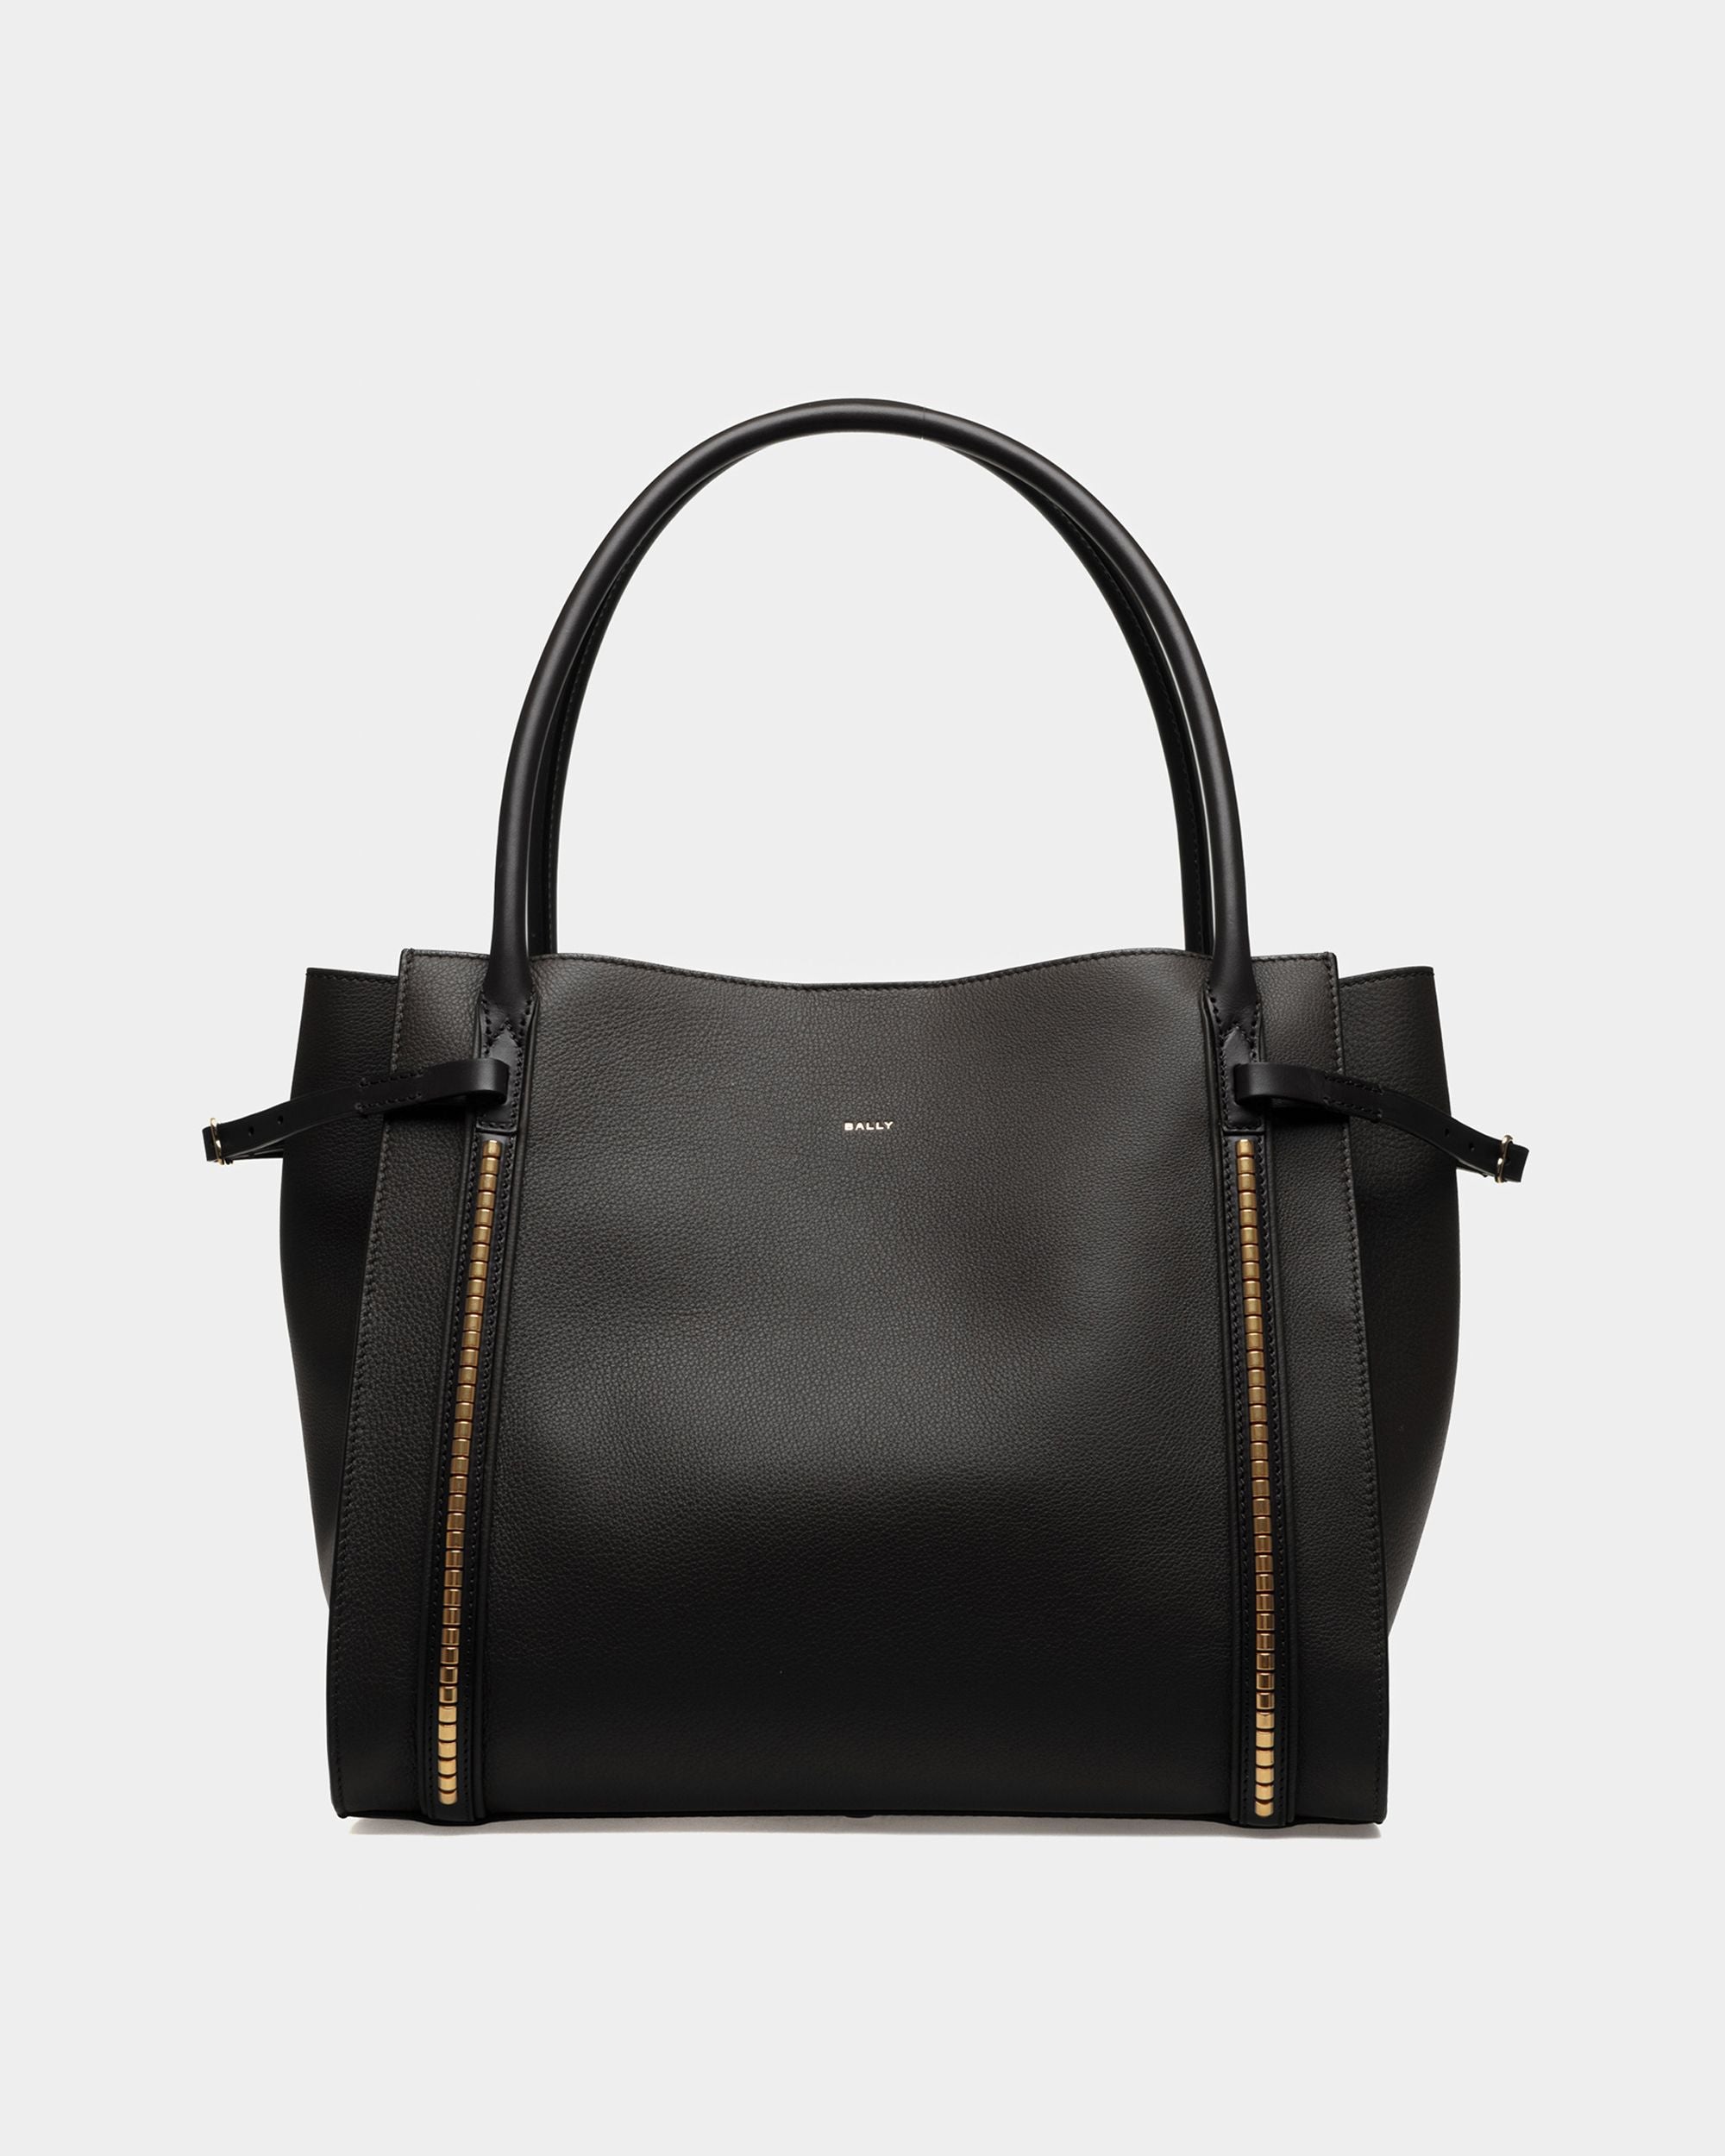 Tote bag Chesney Large | Tote bag donna | Pelle nera | Bally | Still Life Fronte